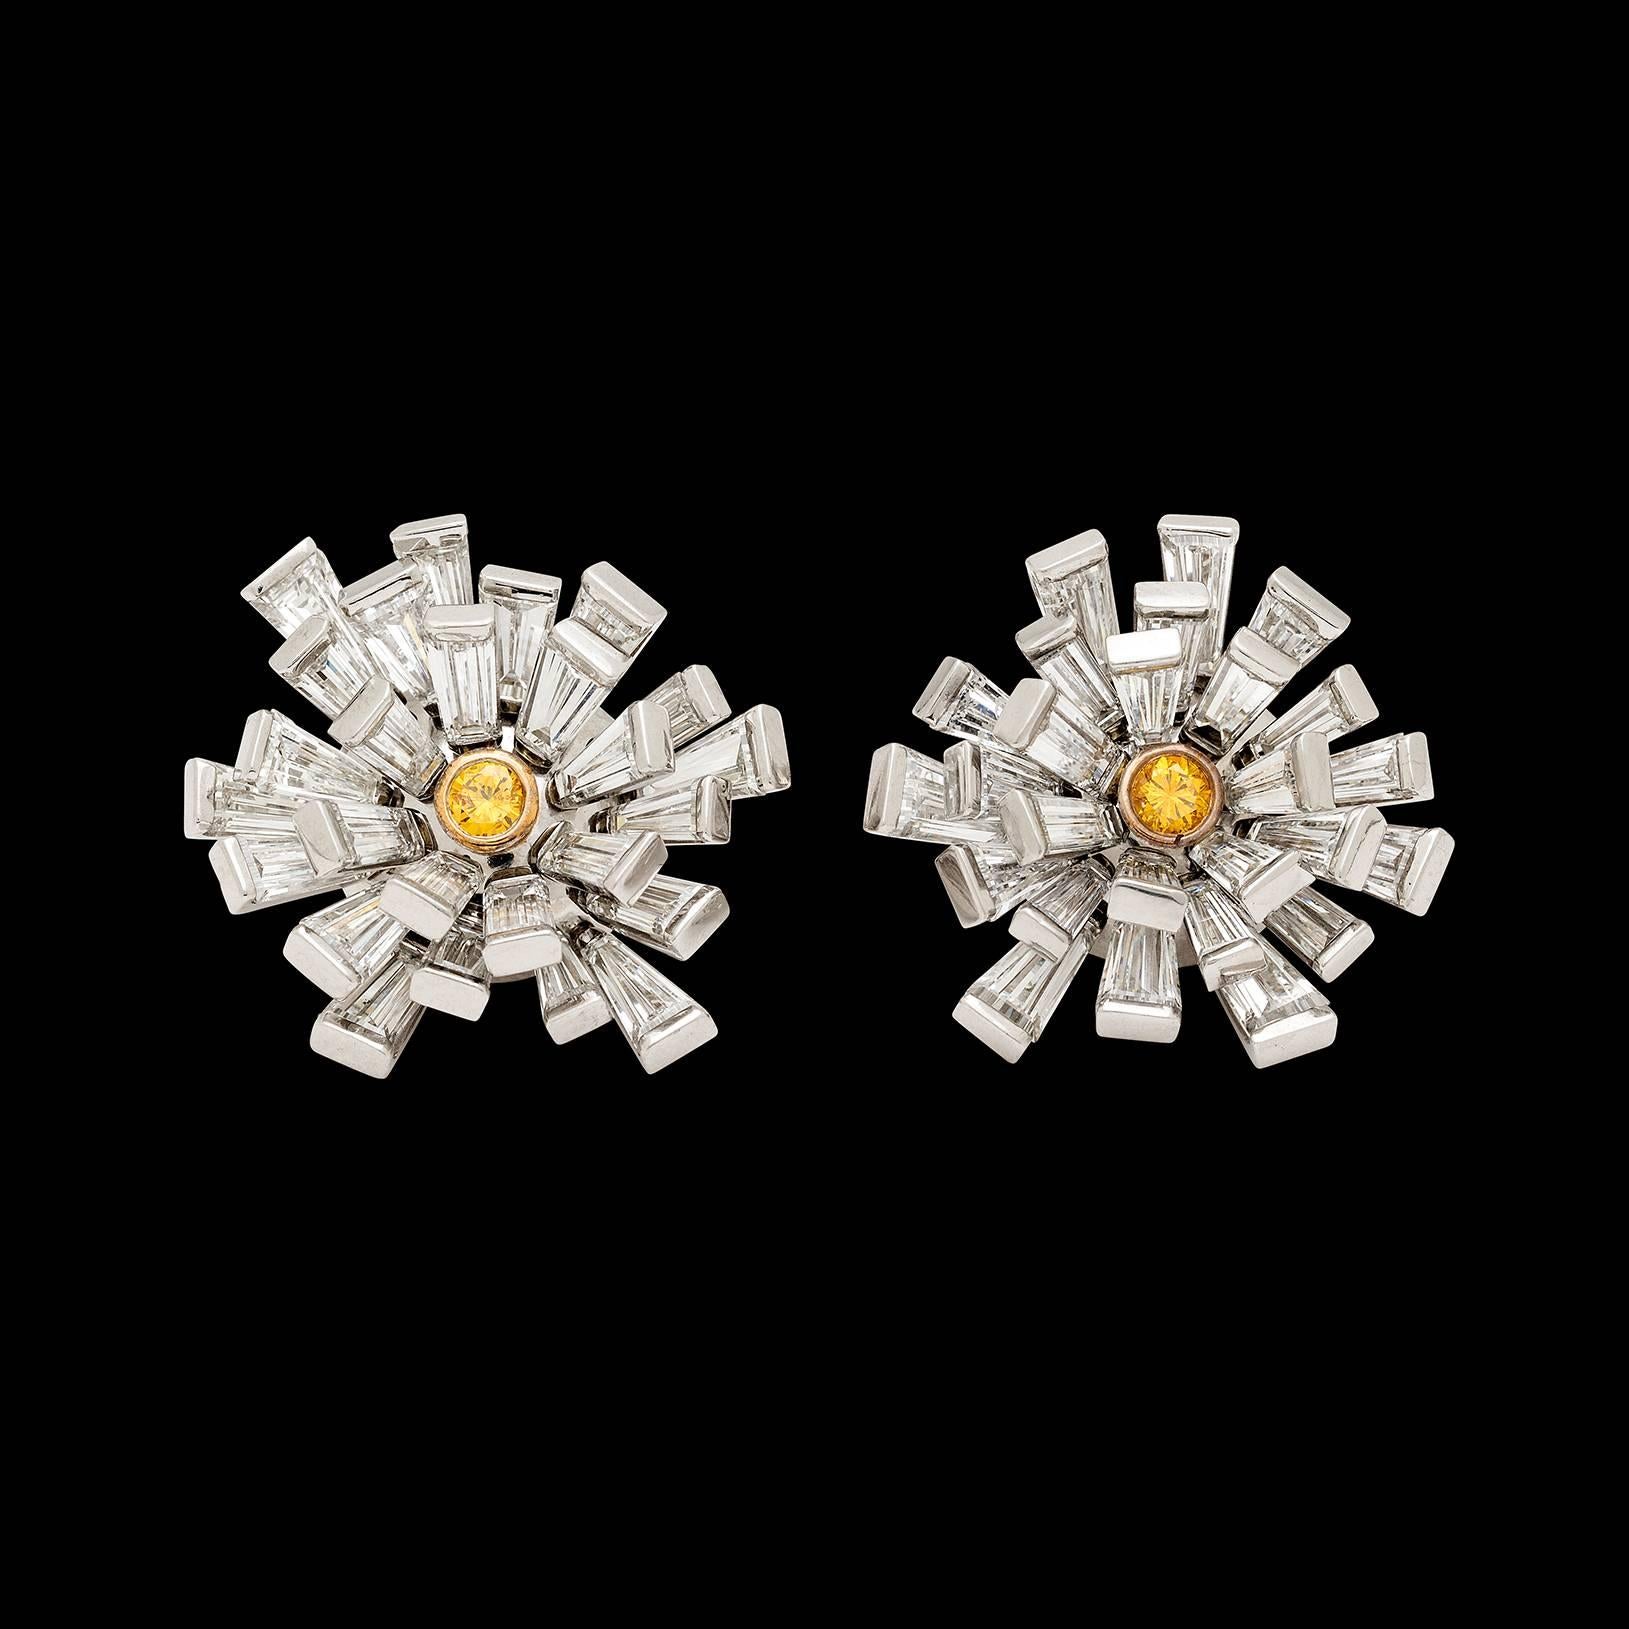 Platinum and 18k yellow gold cluster earrings designed as stylized dandelions, each center around a vivid yellow round brilliant-cut diamond, weighing a total of 0.46 carats. These rare vivid yellow stones are fully surrounded by fine white